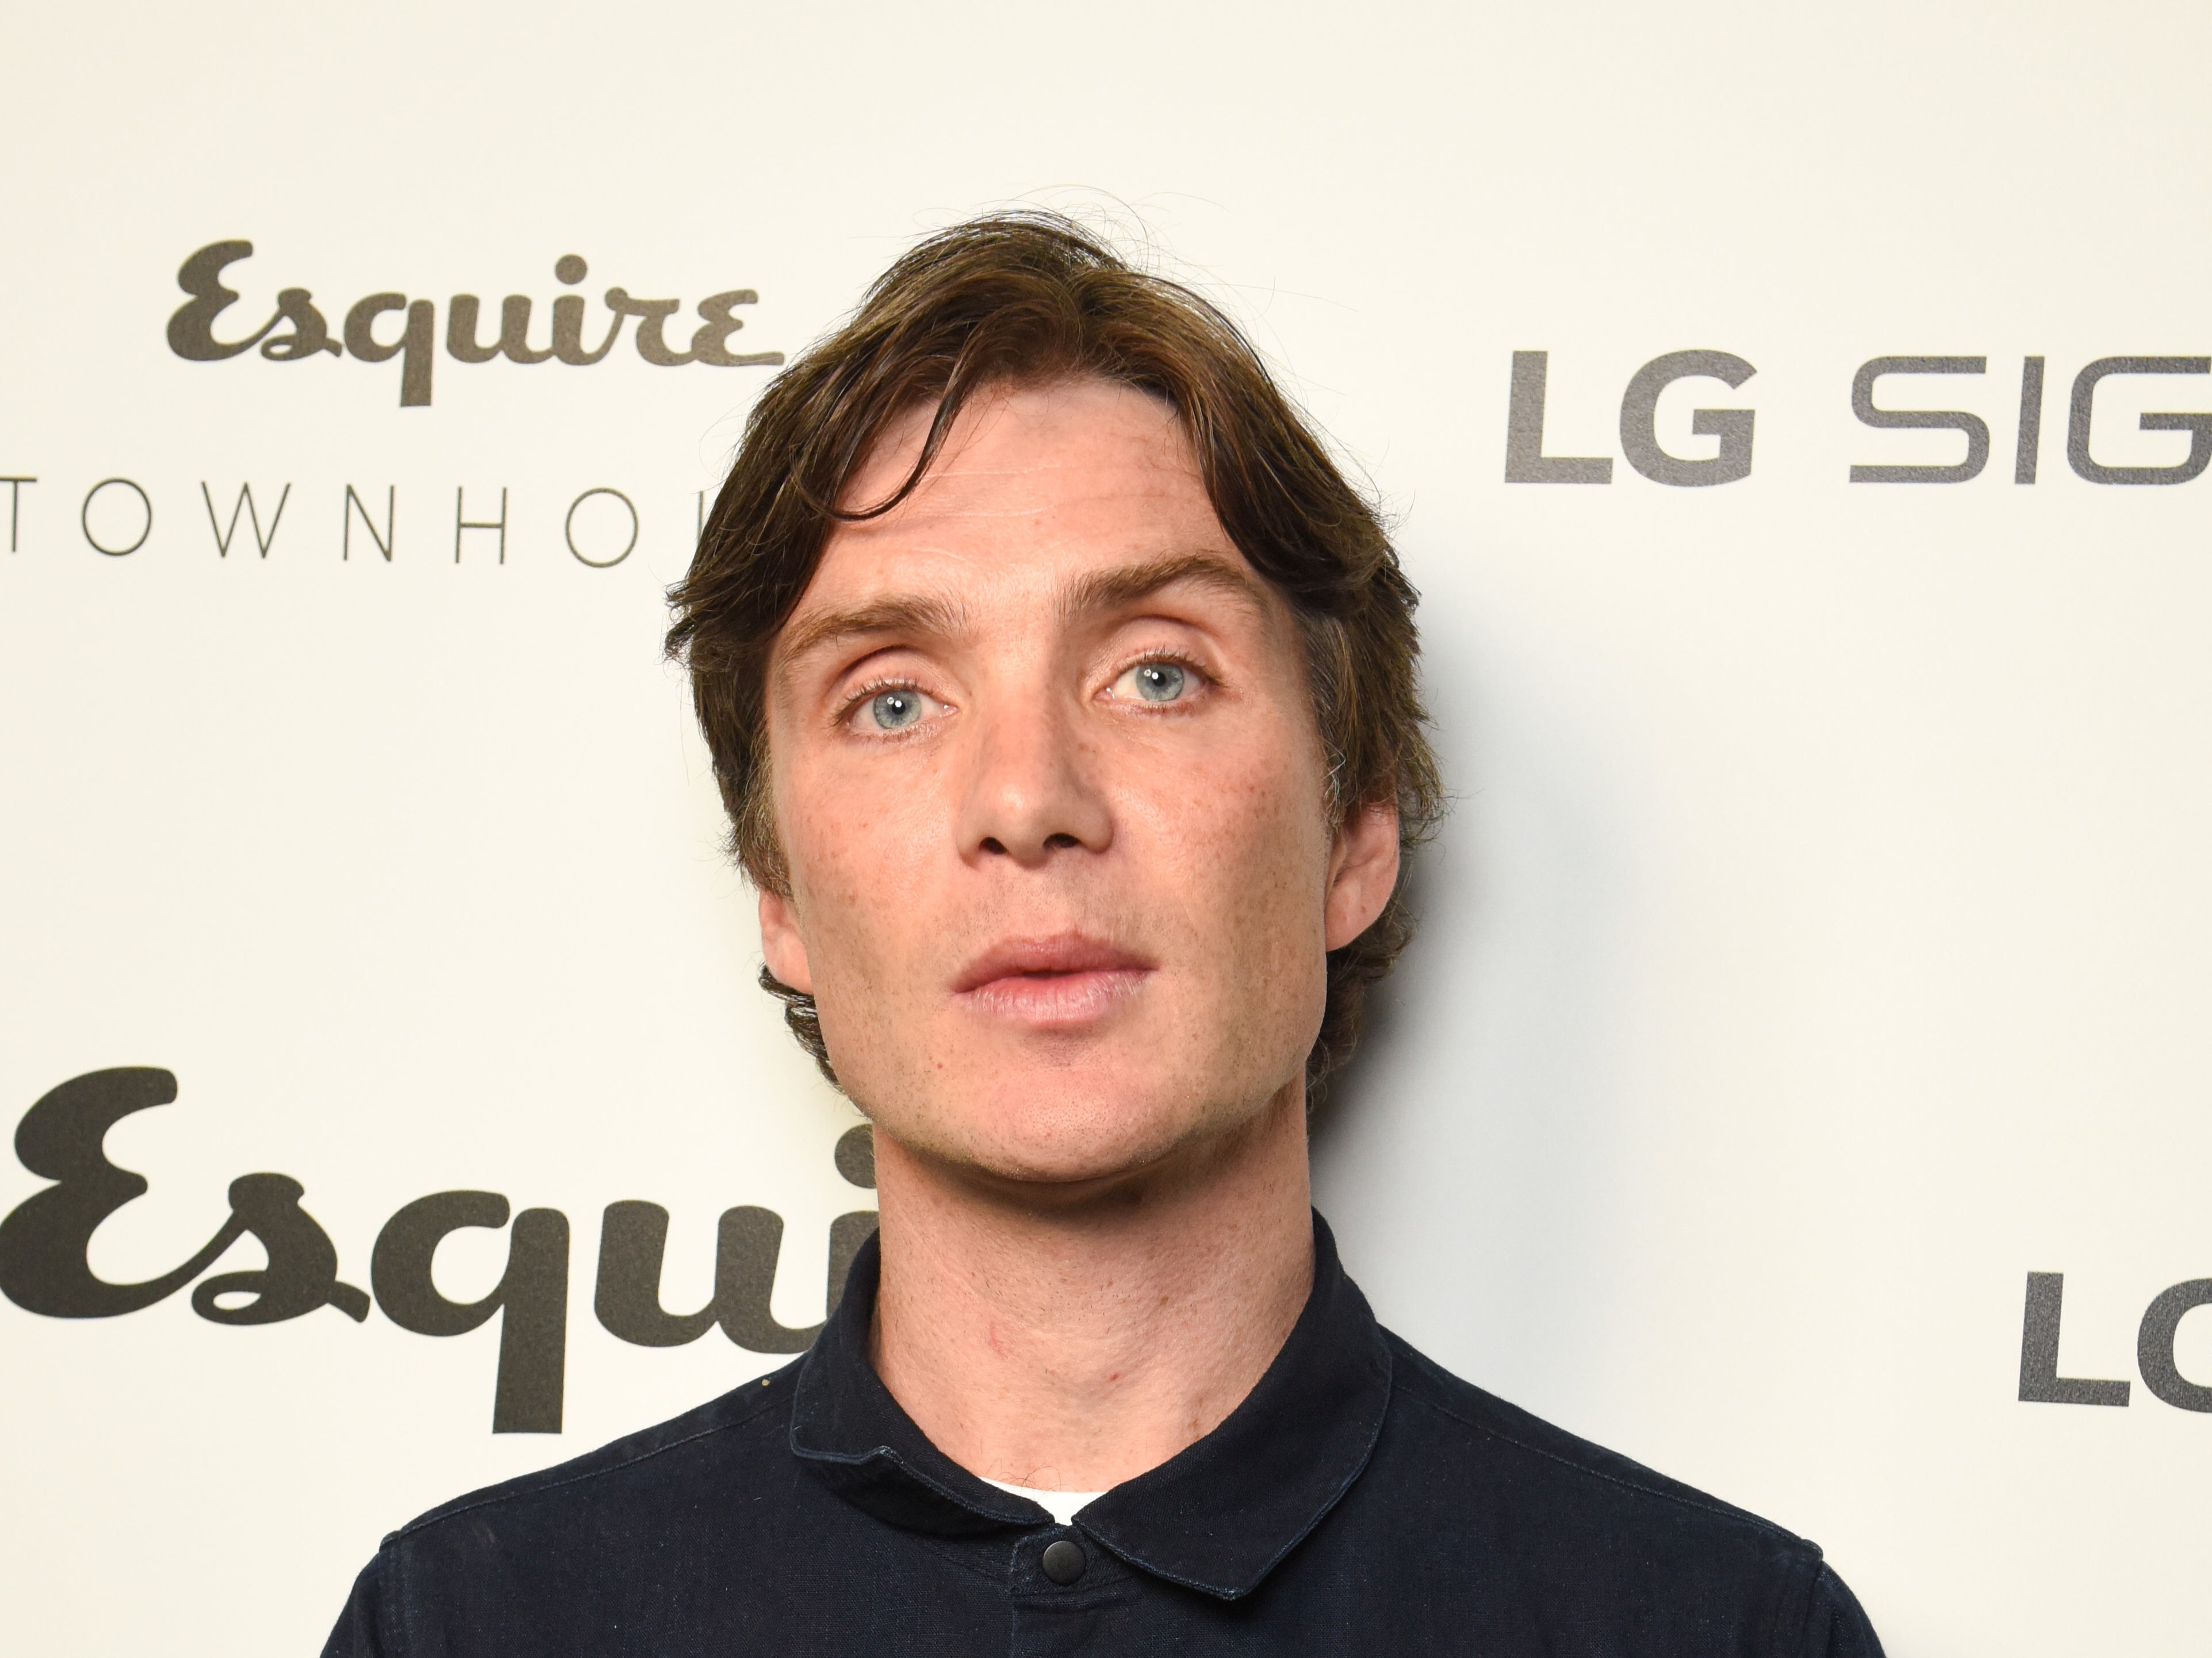 Cillian Murphy has worked with Nolan several times before